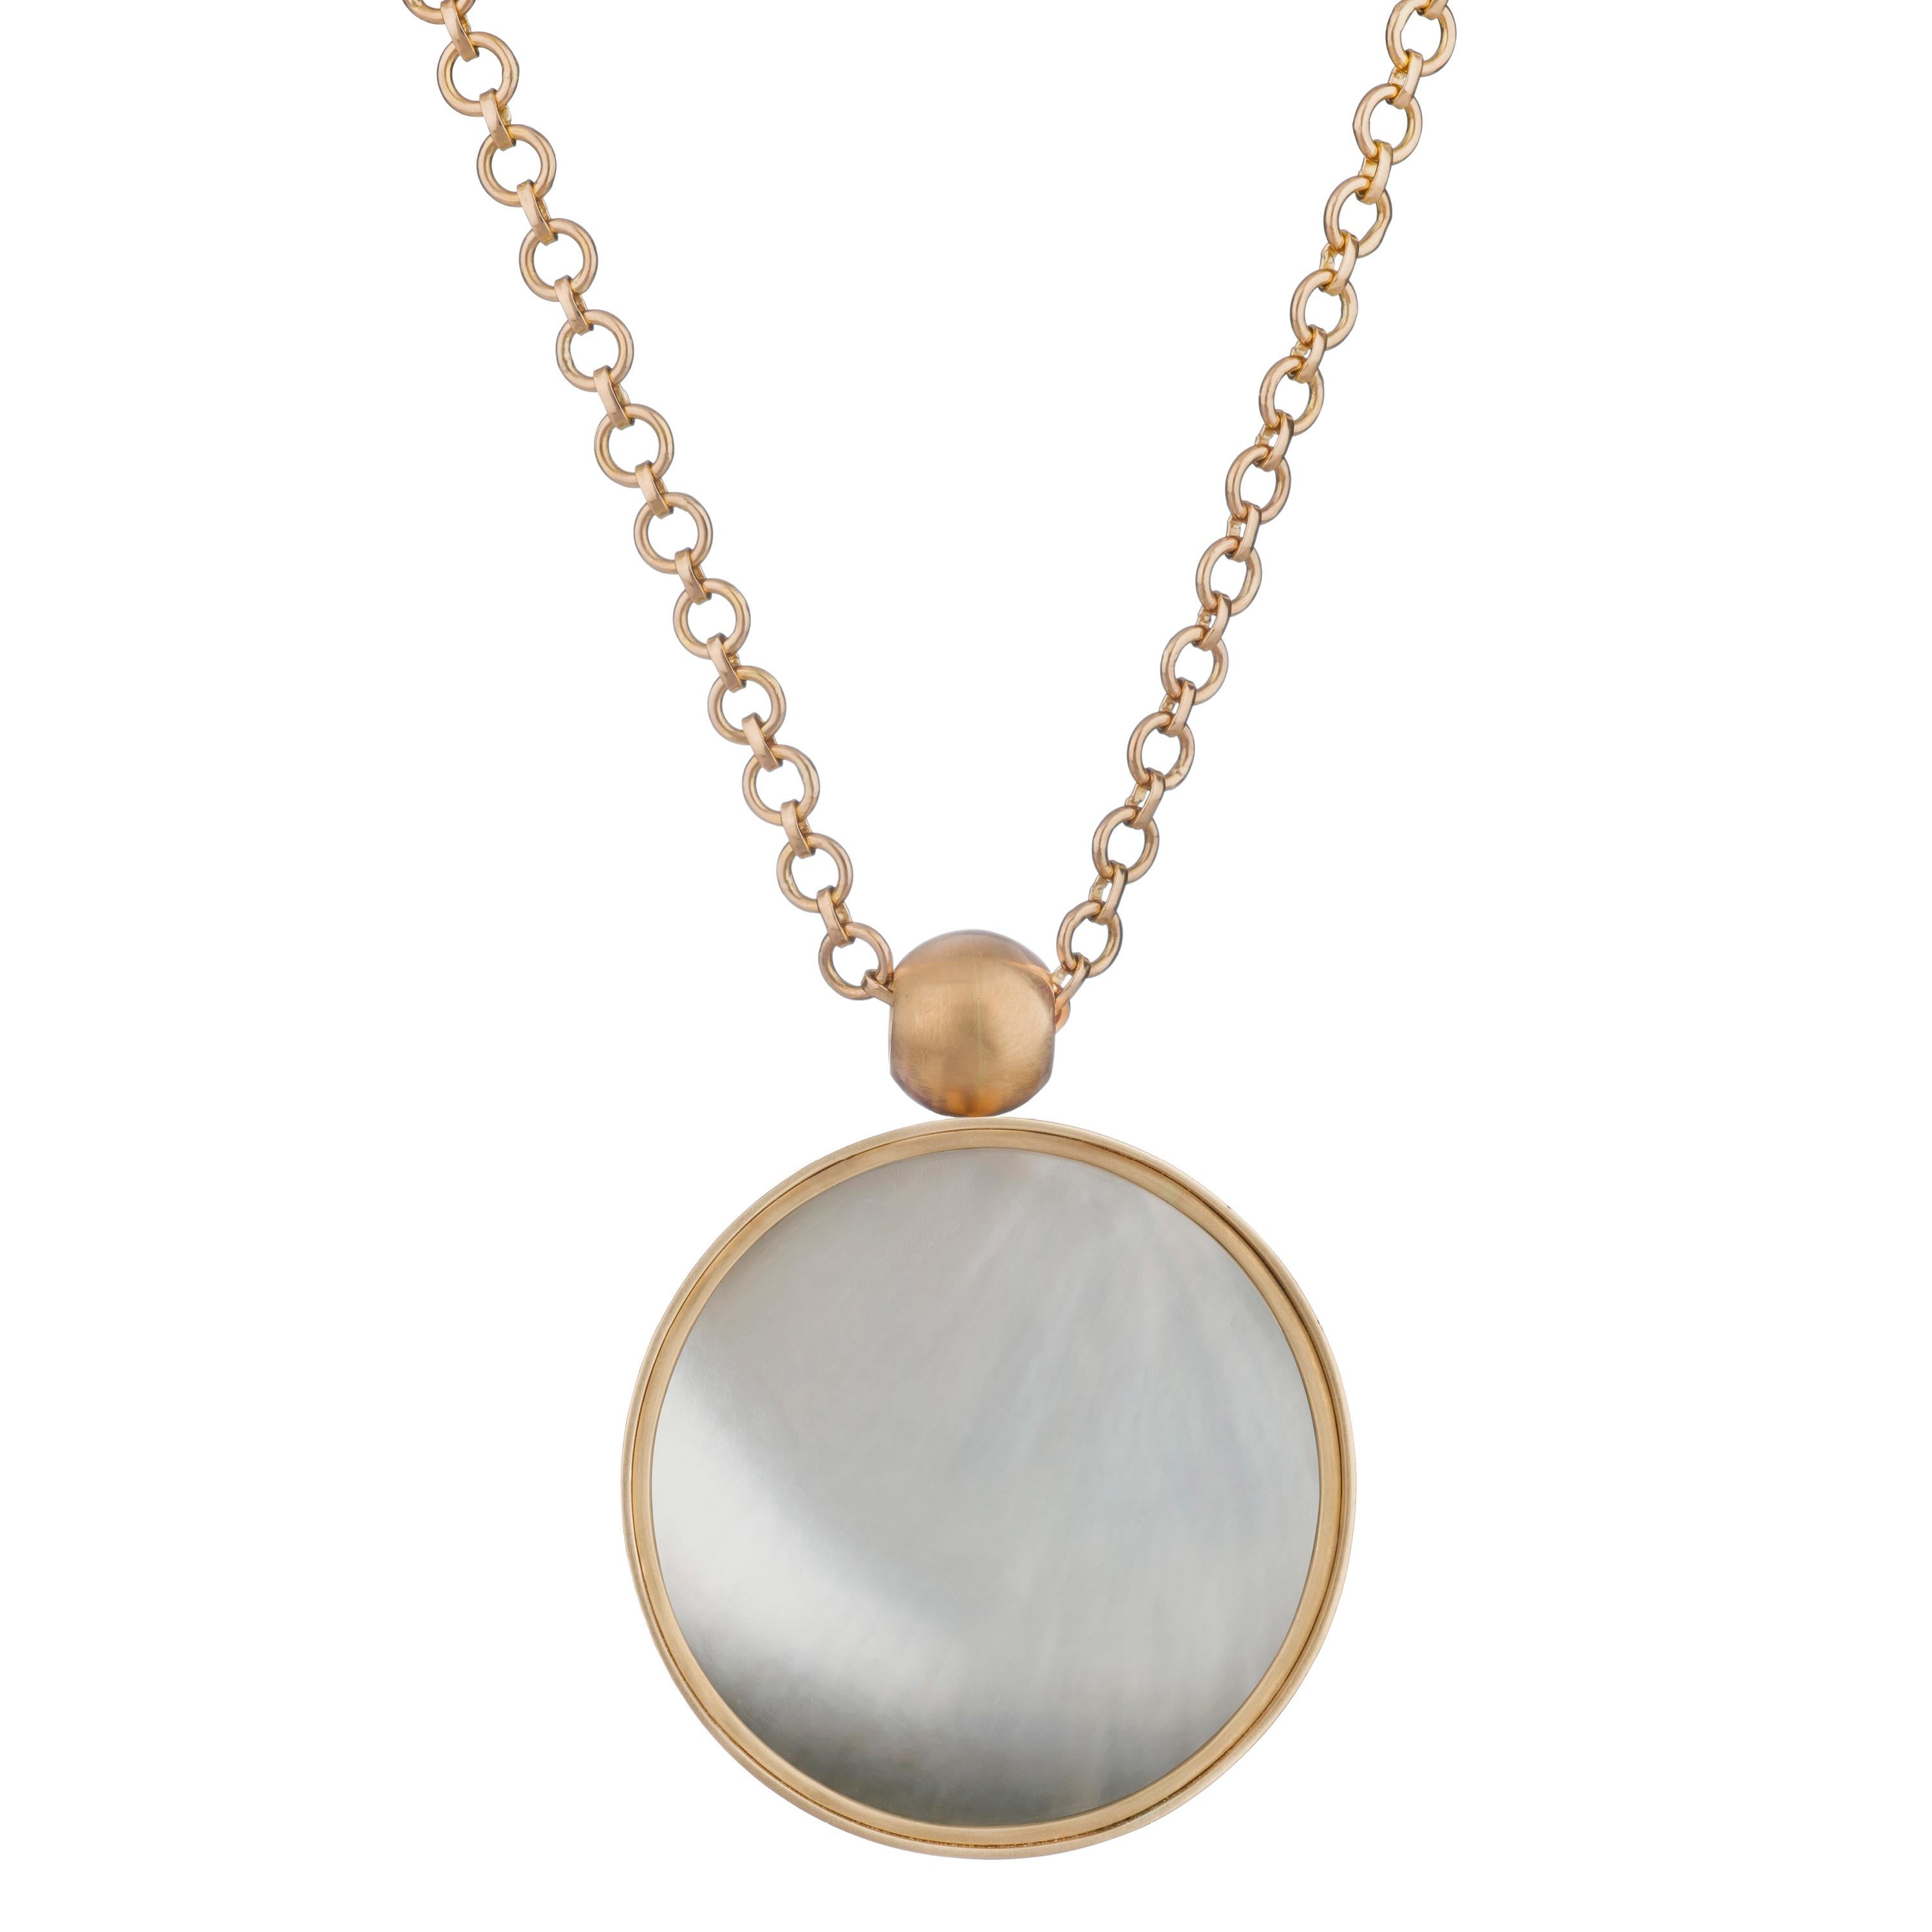 Ouroboros rhodocrosite and mother of pearl  swivel pendant necklace set in 18 karat gold on a handmade 36 inch 18 karat gold chain, with an 18 karat gold Ouroboros lasered ball to finish the back. 

This is part of the 'Any Colour You Like' (the